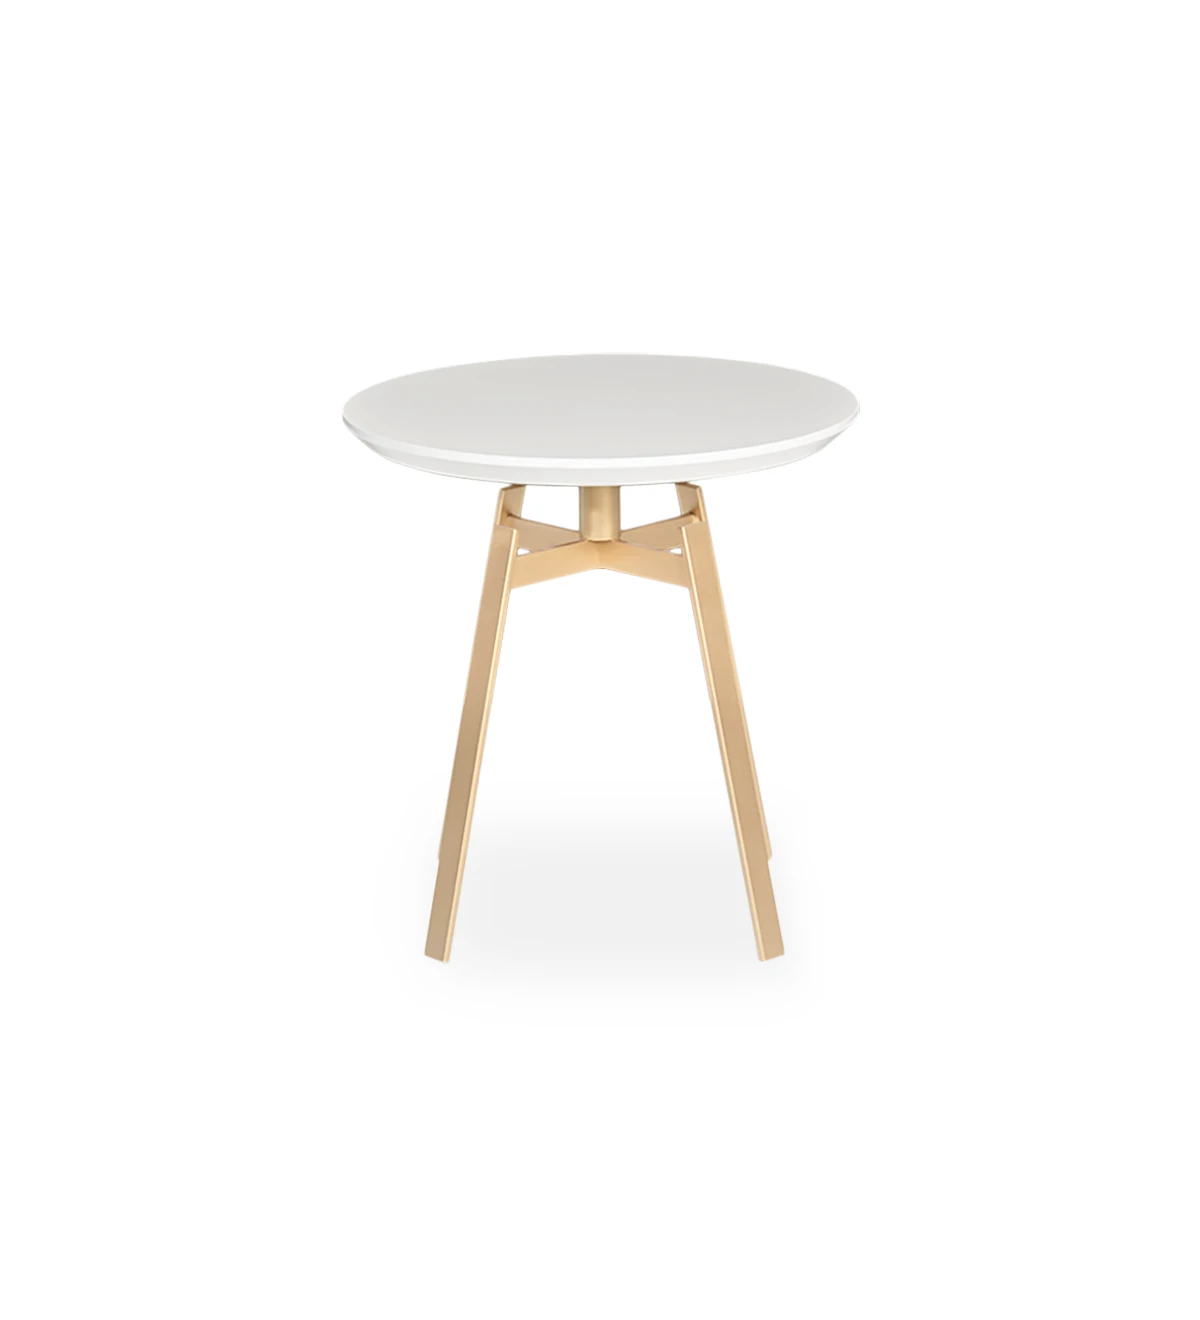 Tokyo round side table, pearl lacquered top, gold lacquered metal foot, Ø 48,5 cm.